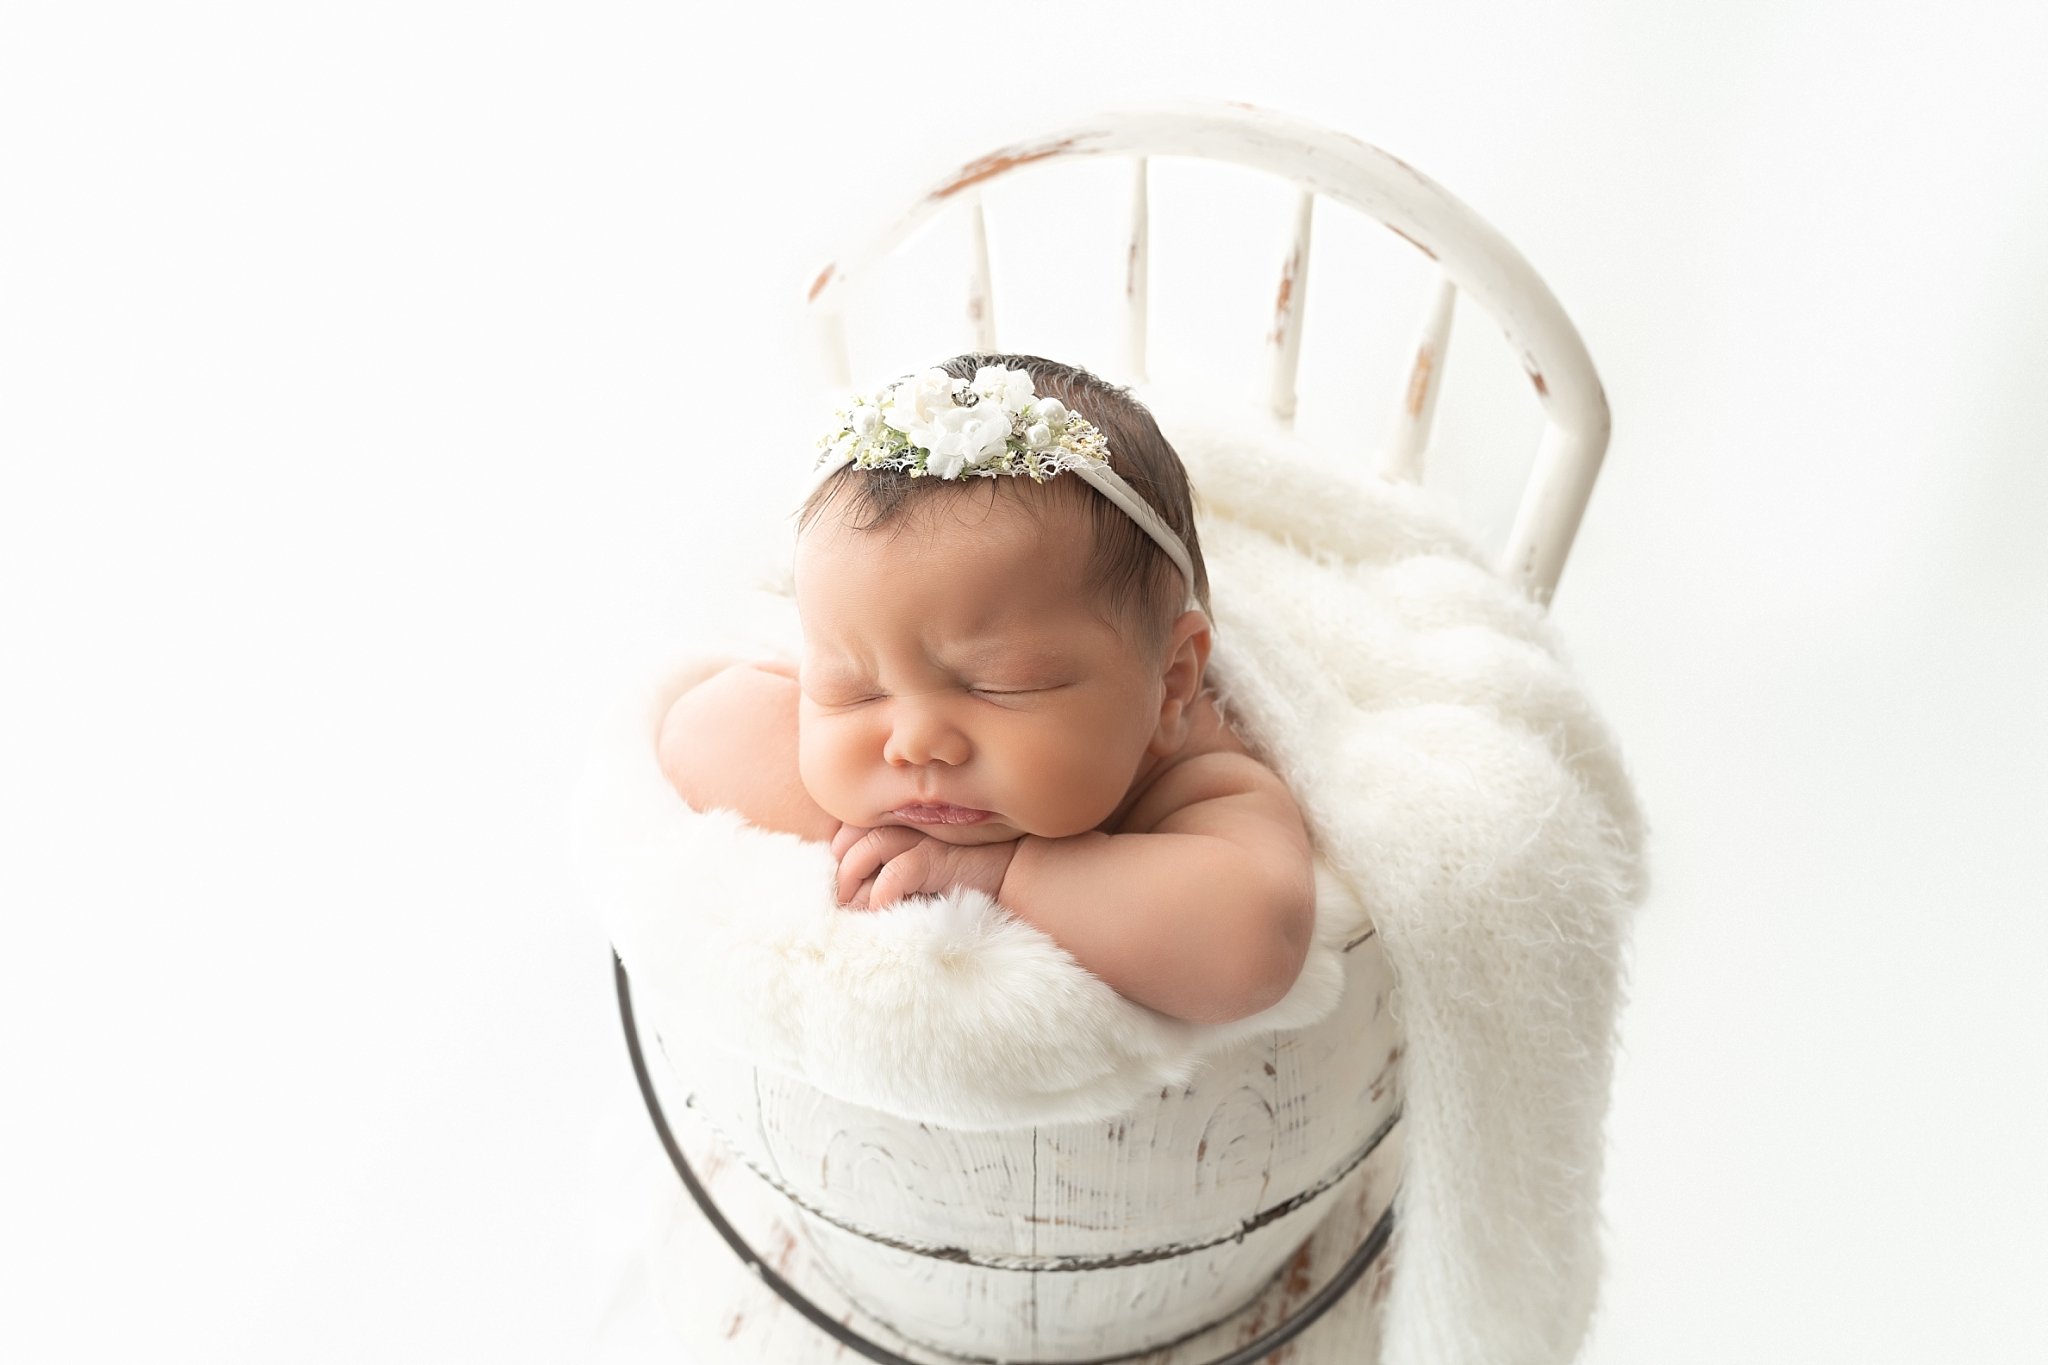 Book a newborn session &amp; receive a FREE MATERNITY Mini Session or MILESTONE session! 

Mini Newborn Session - Just baby being photographed. $379.00
Full Newborn Session - Immediate family, sibling, parent poses, &amp; individual newborn. $439.00
